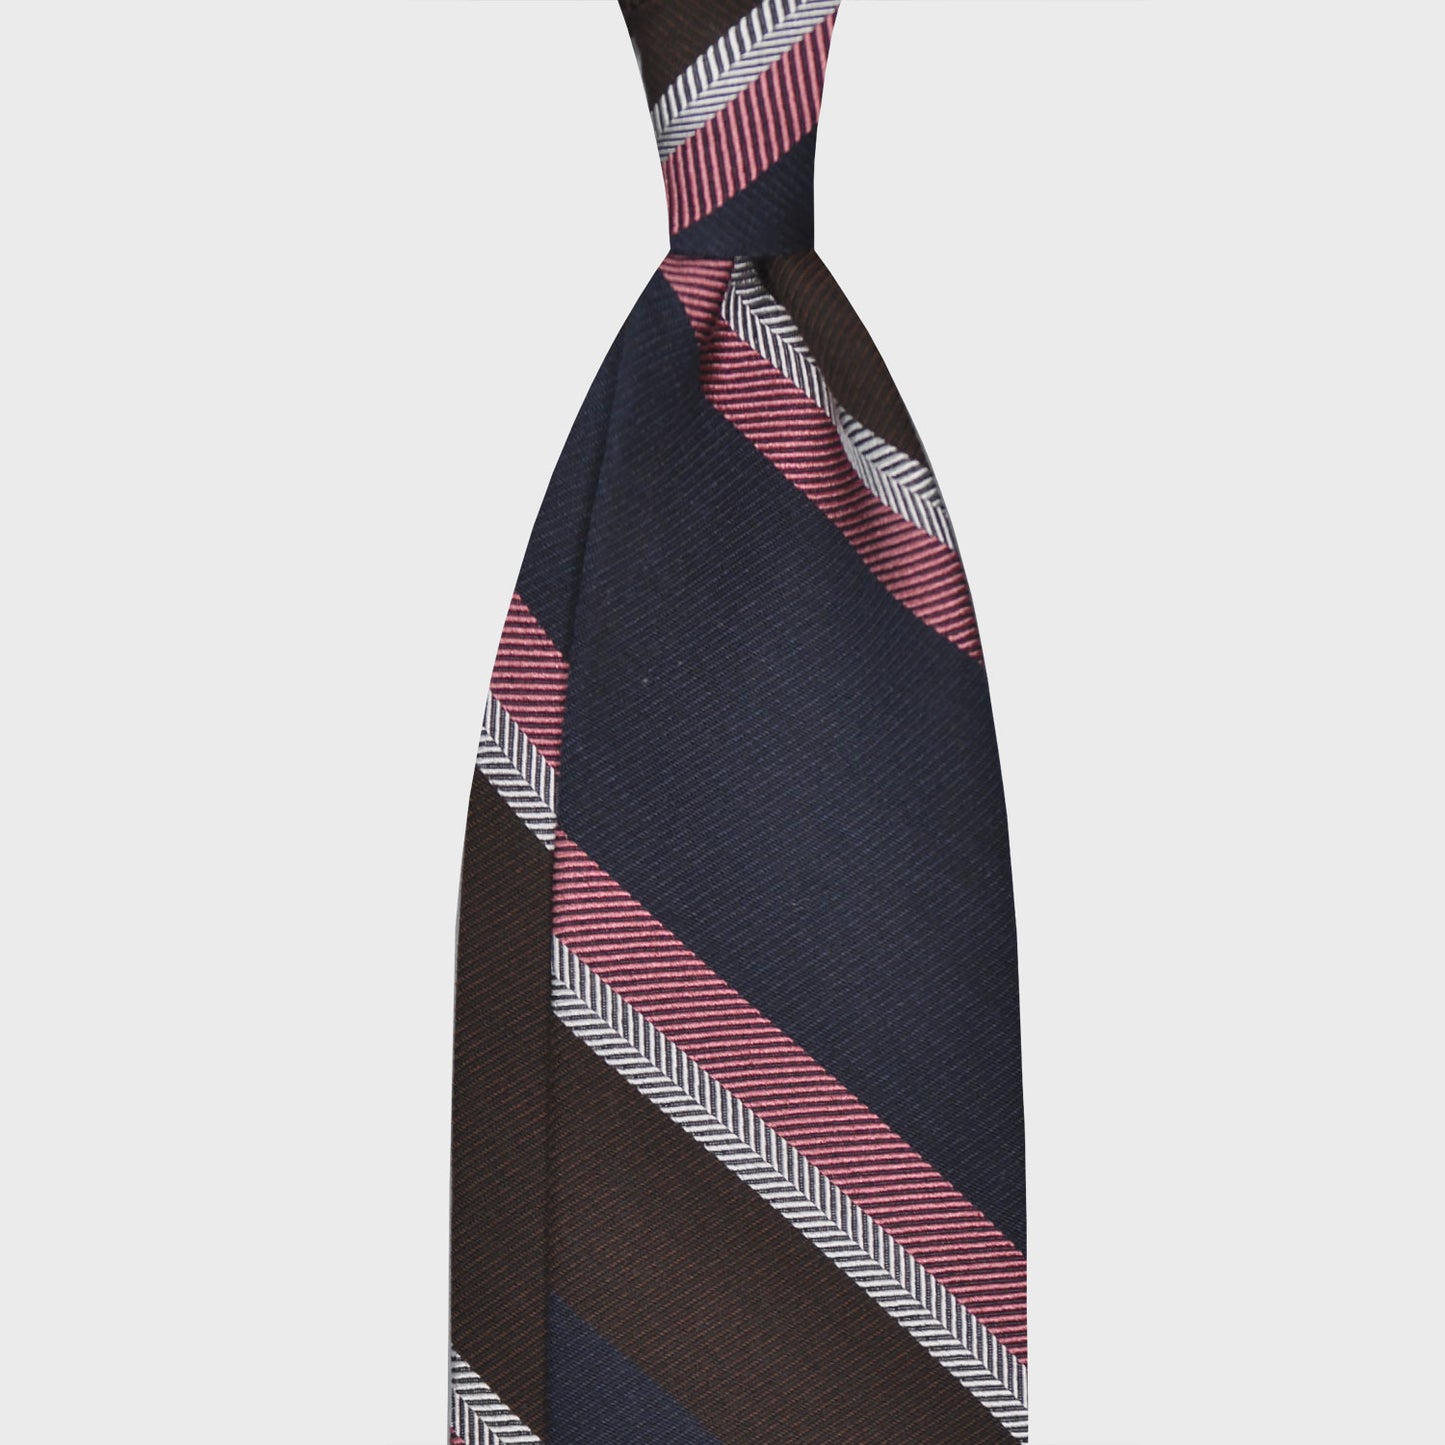 Load image into Gallery viewer, Coffee Brown Silk Wool Striped Tie. Elegant regimental necktie made with silk and wool, hand rolled edge, unlined 3 folds, coffee brown and navy blue blocks with pink and silver striped, F.Marino Napoli ties exclusive for Wools Boutique Uomo
